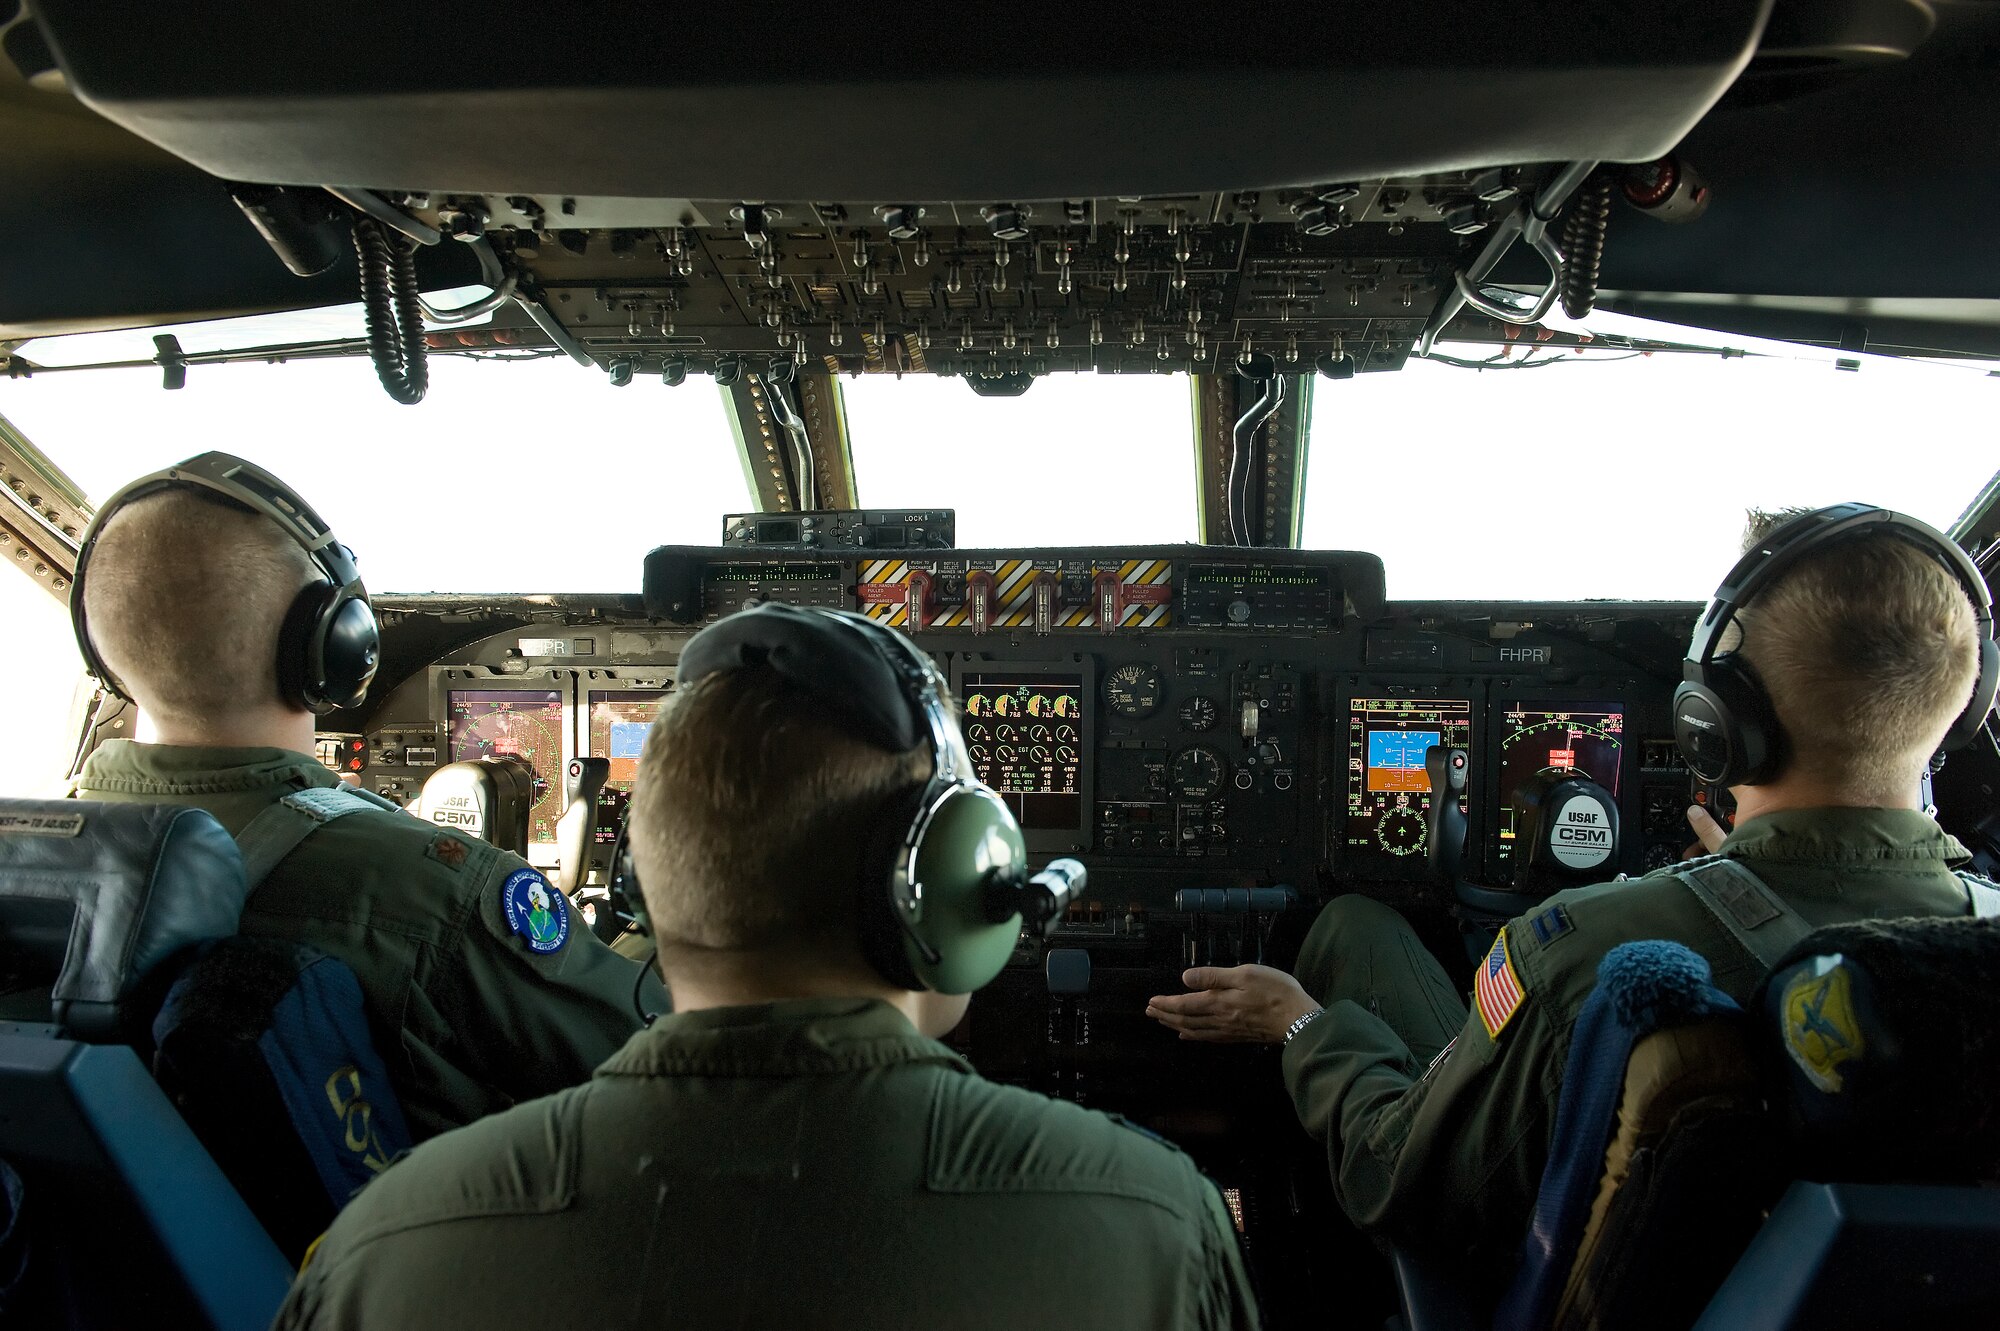 C-5M pilots Maj. Brandon Stock, 436th Operations Support Squadron deputy chief of current operations, left; Capts. Phillip Amrine, center, and Neal Ballas, right, both assigned to the 9th Airlift Squadron, Dover Air Force Base, Del., slowly approach a KC-135T Stratotanker from behind during an air refueling training flight Oct. 29, 2014. Seventeen honorary commanders went on the flight and observed the aerial refueling with two Pennsylvania Air National Guard KC-135T Stratotankers from the 171st Air Refueling Wing, Pittsburgh International Airport, Pa. (U.S. Air Force photo/Roland Balik)